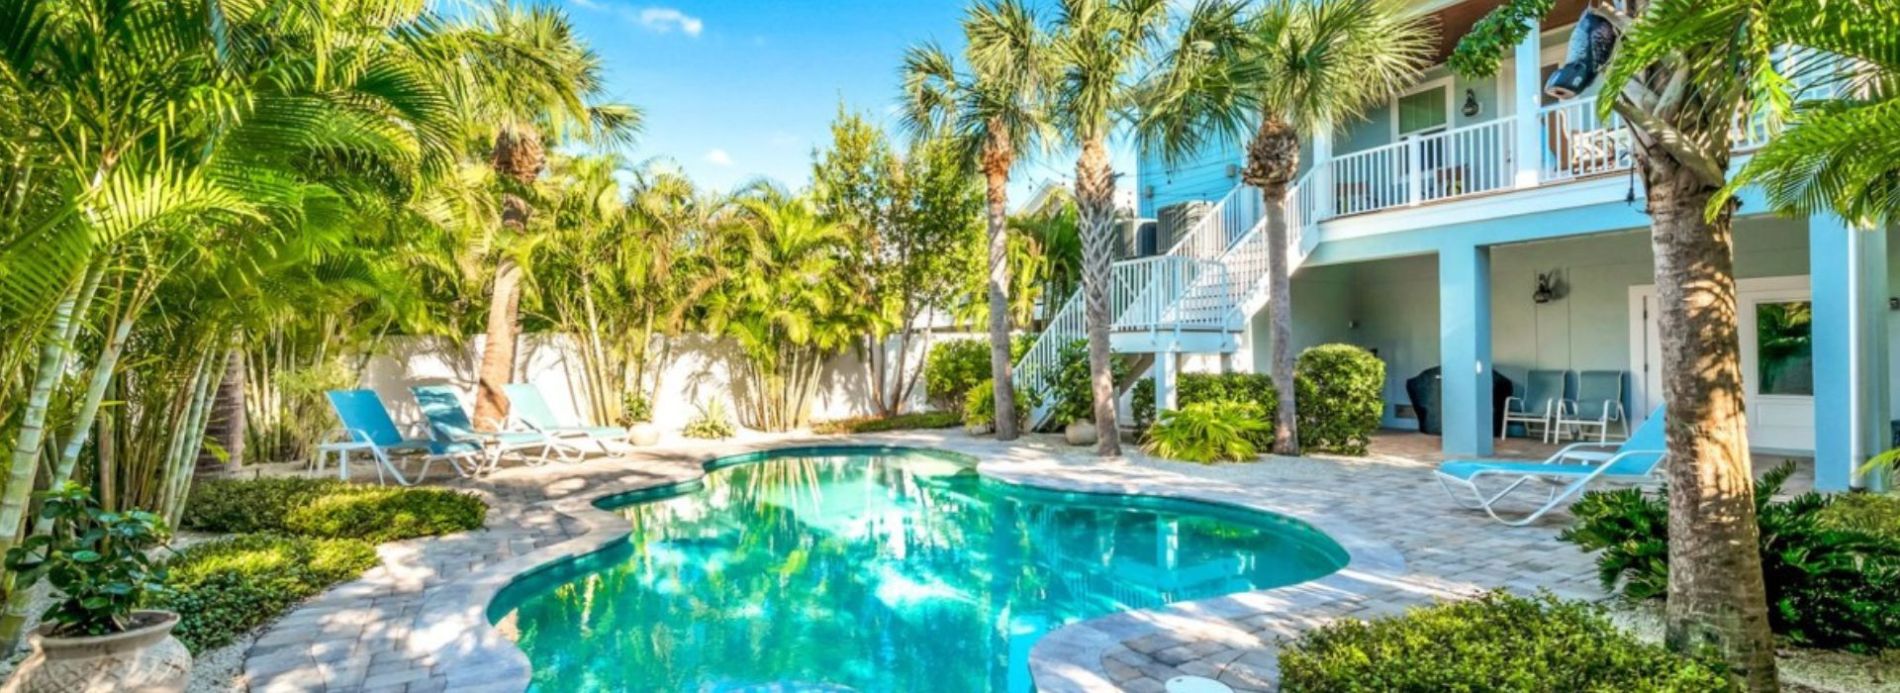 Anna Maria Island Rentals With a Pool For a Private Oasis Feature Image